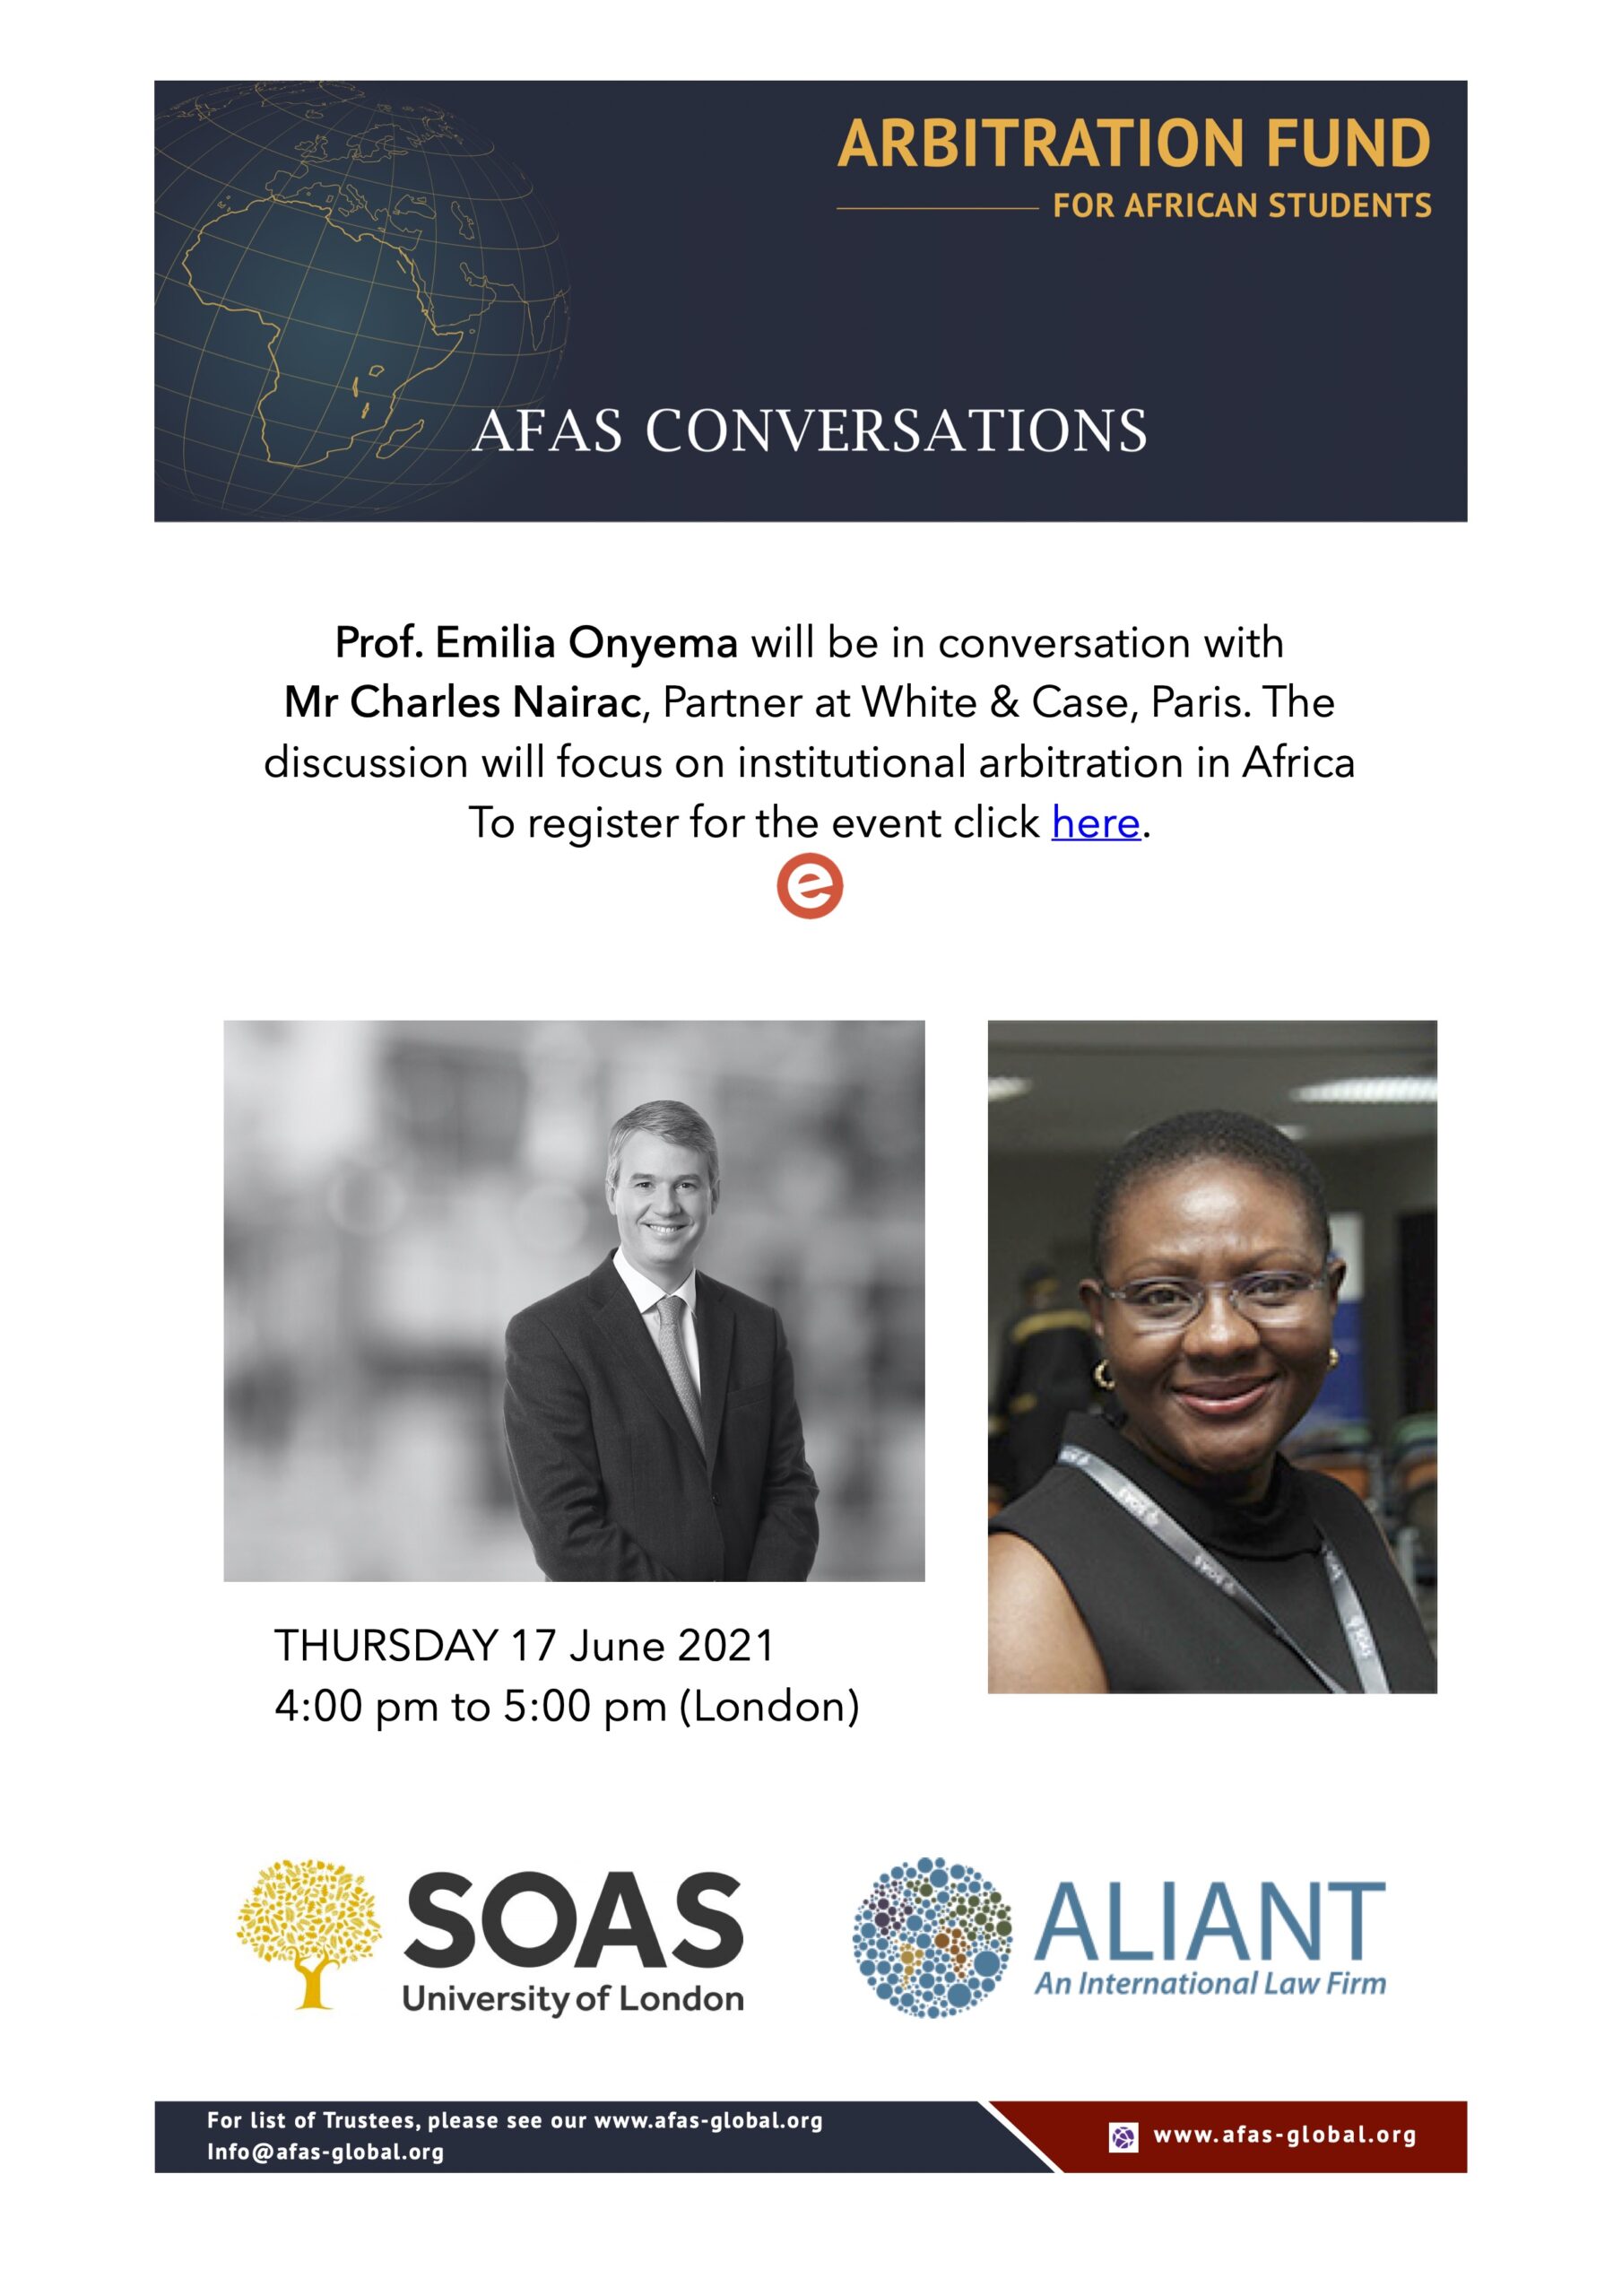 17 June: Prof Emilia Onyema will be in conversation with Mr Charles Nairac, Partner at White & Case with focus on institutional arbitration in Africa